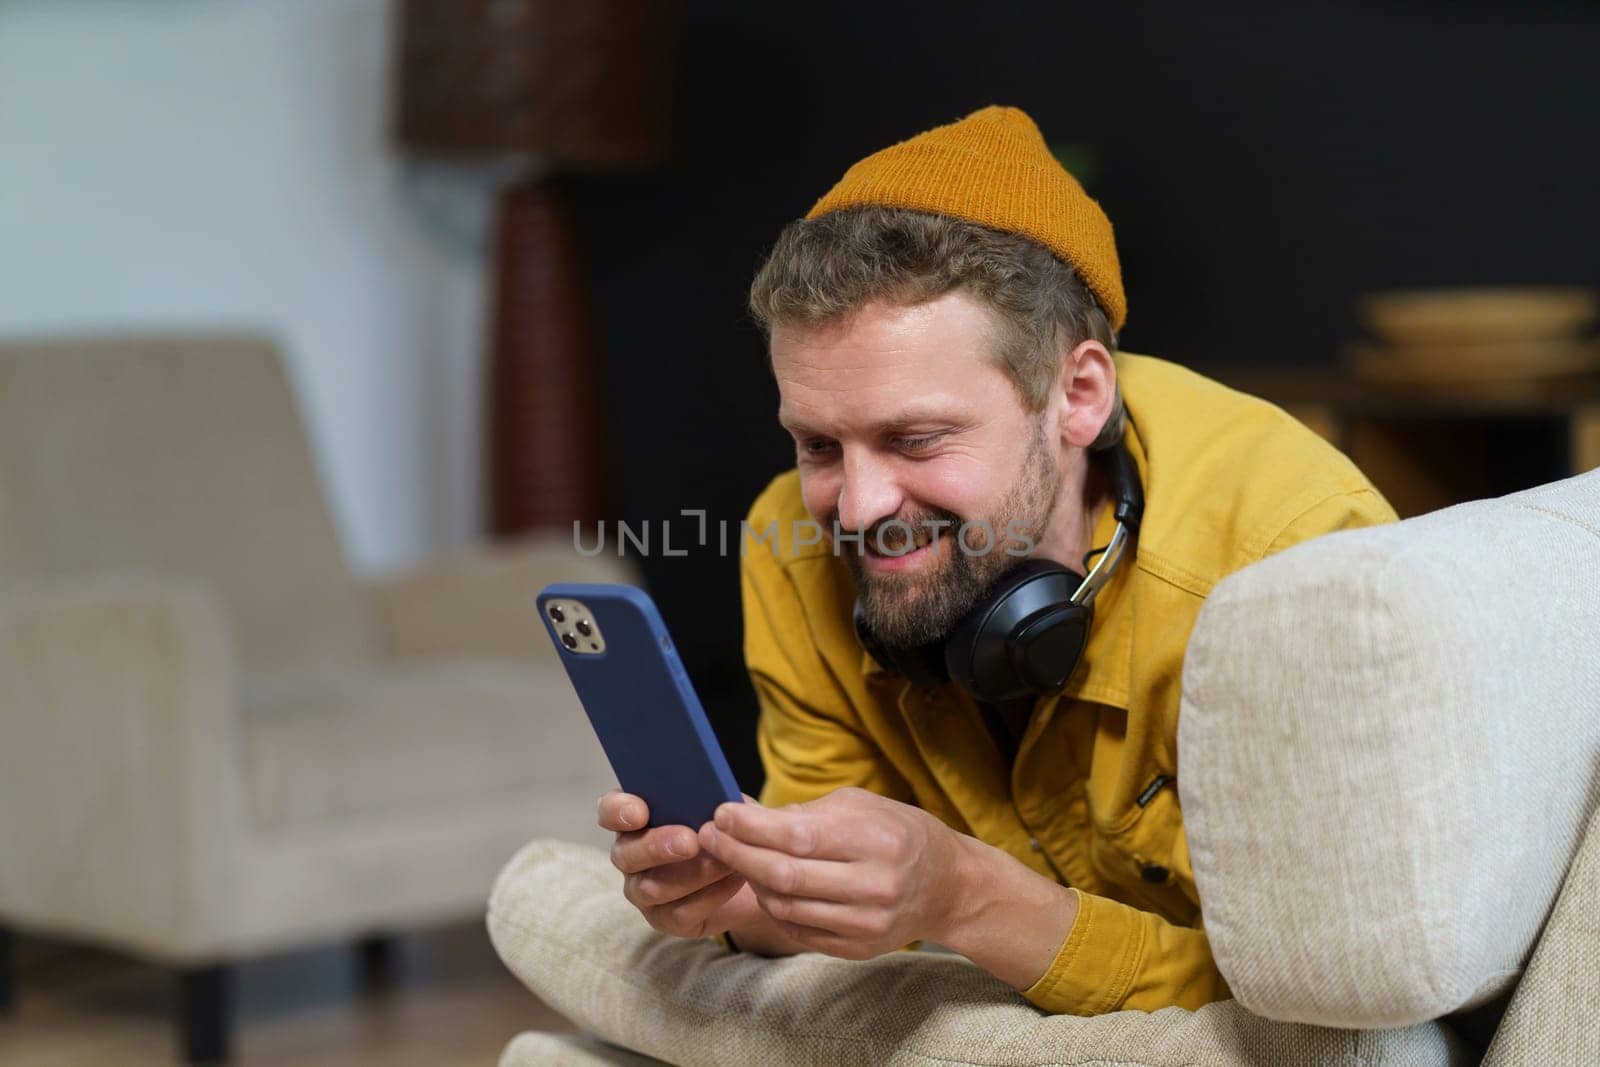 Man in casual spending his leisure time home on sofa, engrossed in phone. He texting someone using messaging app, indicating active communication through digital means. by LipikStockMedia